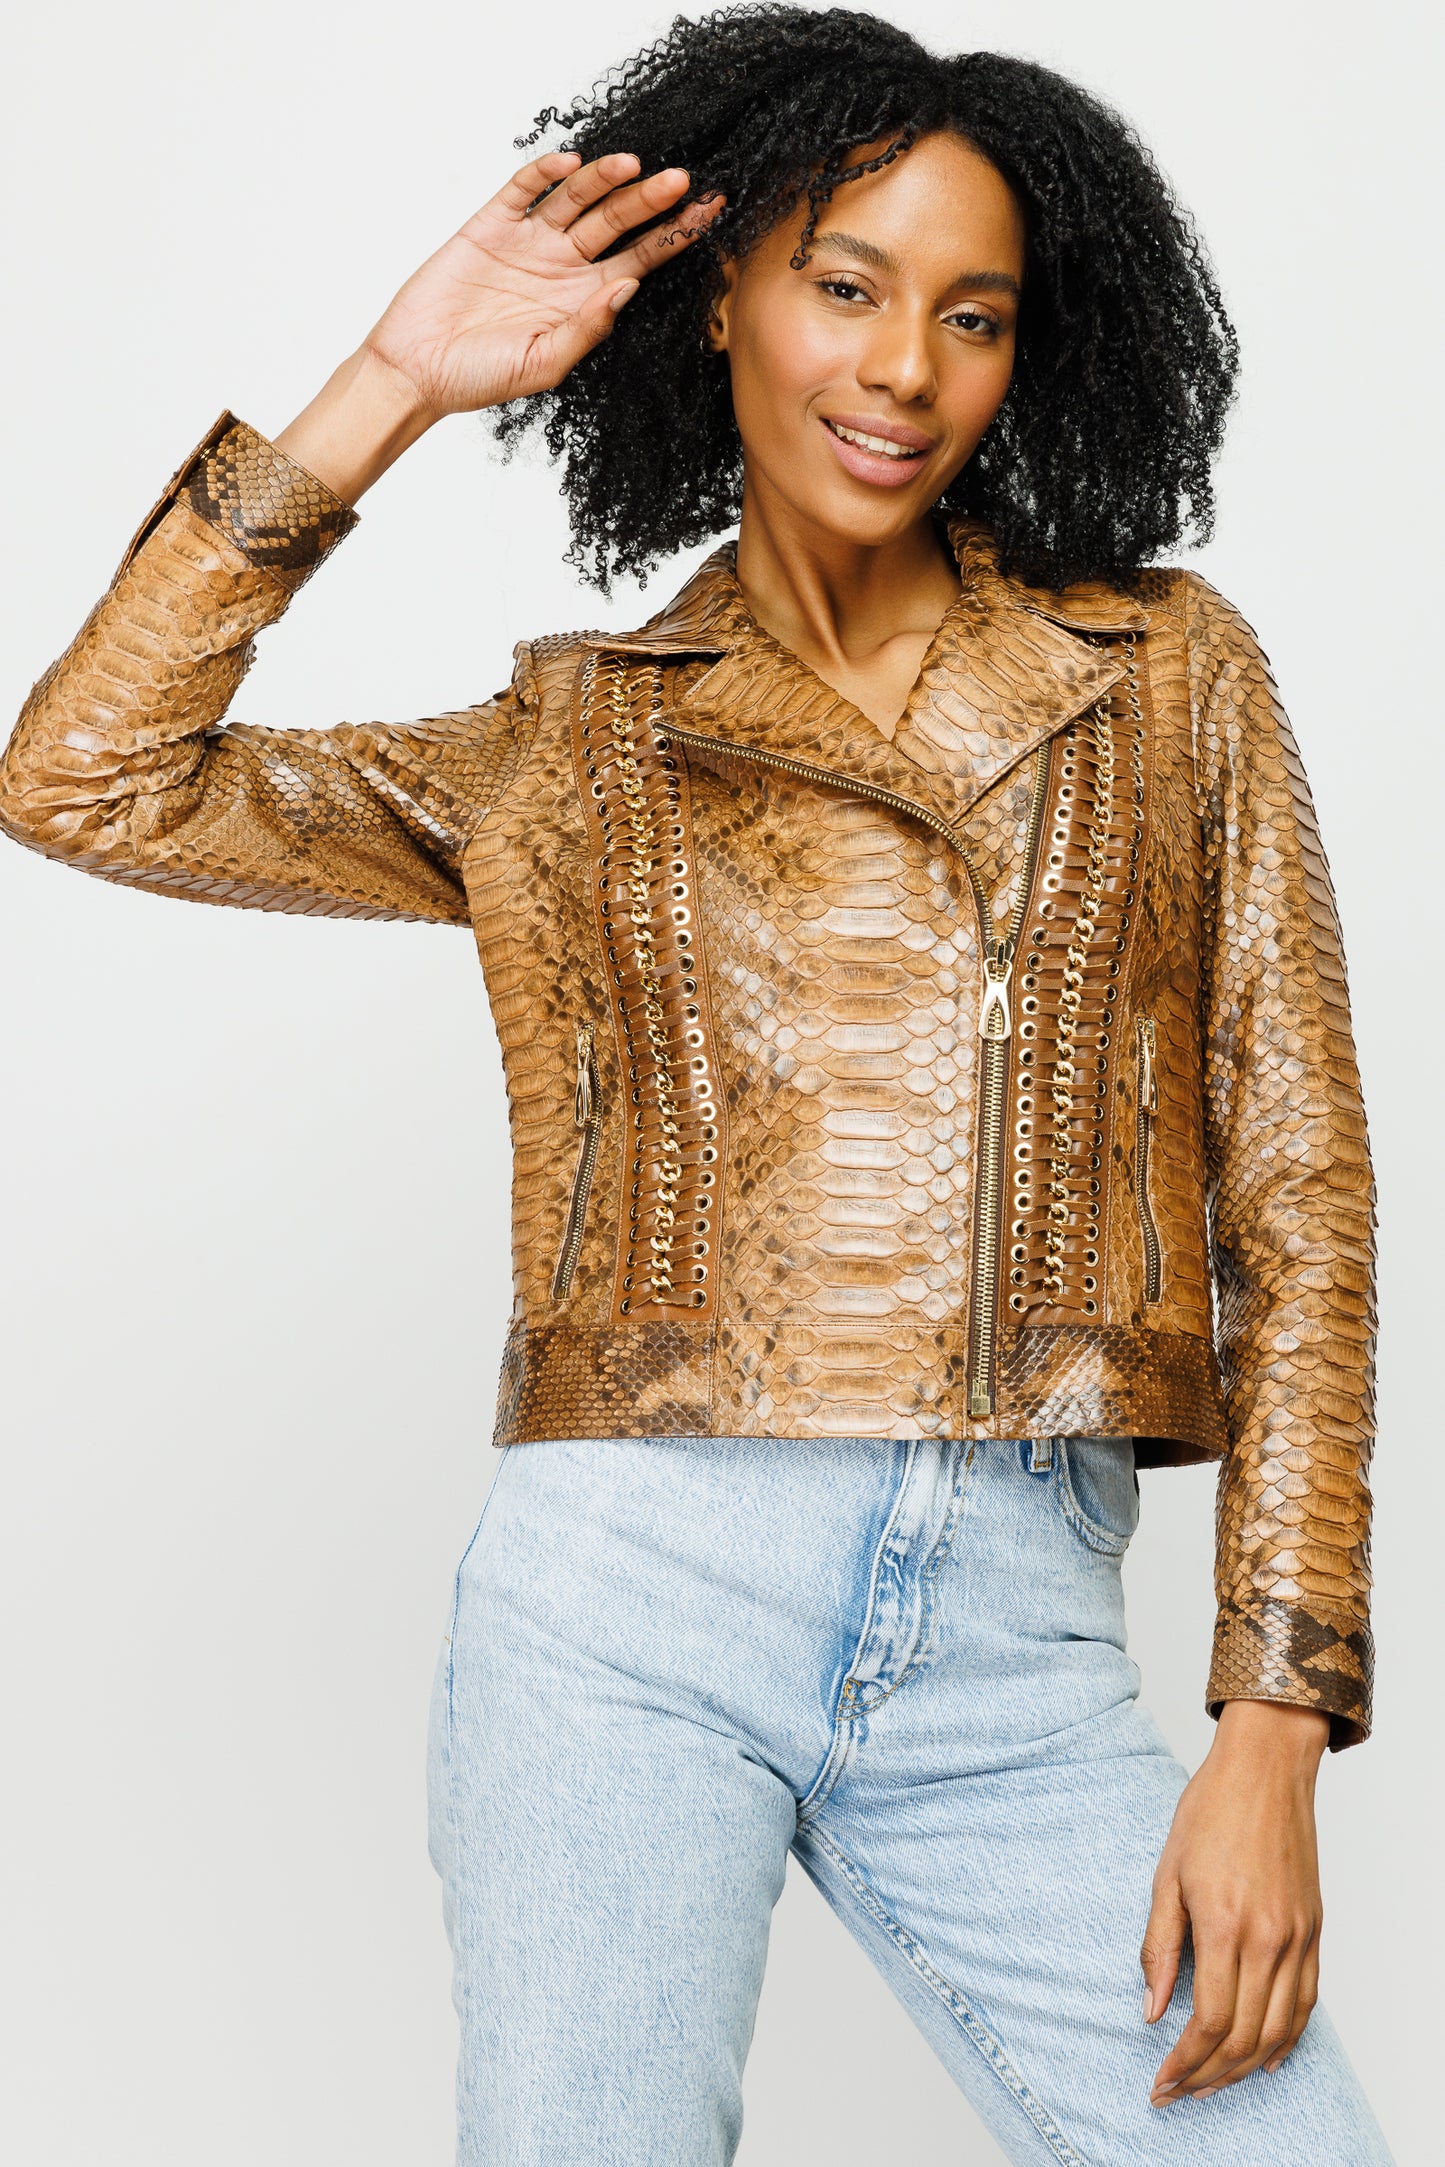 The Nayro Pythn Tan Leather Jacket